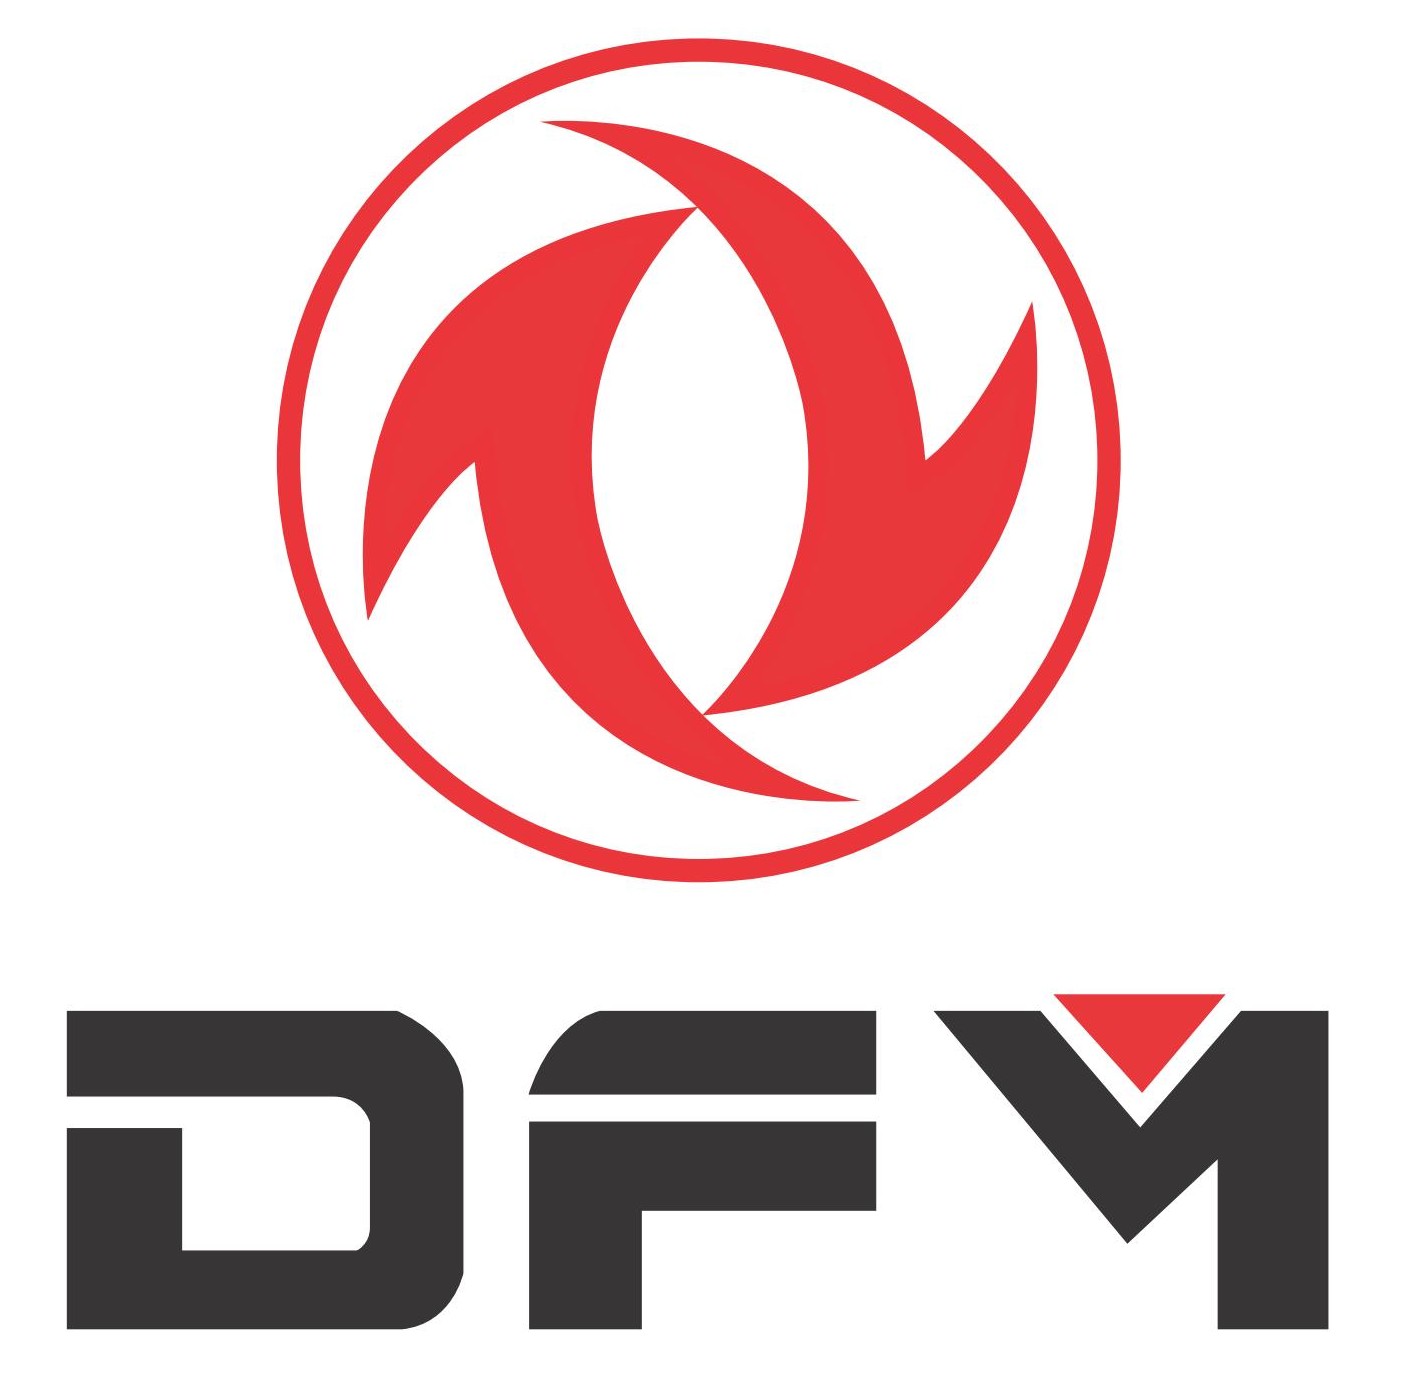 Dongfeng Motor Corporation Hdpng.com  - Dongfeng Motor Vector, Transparent background PNG HD thumbnail